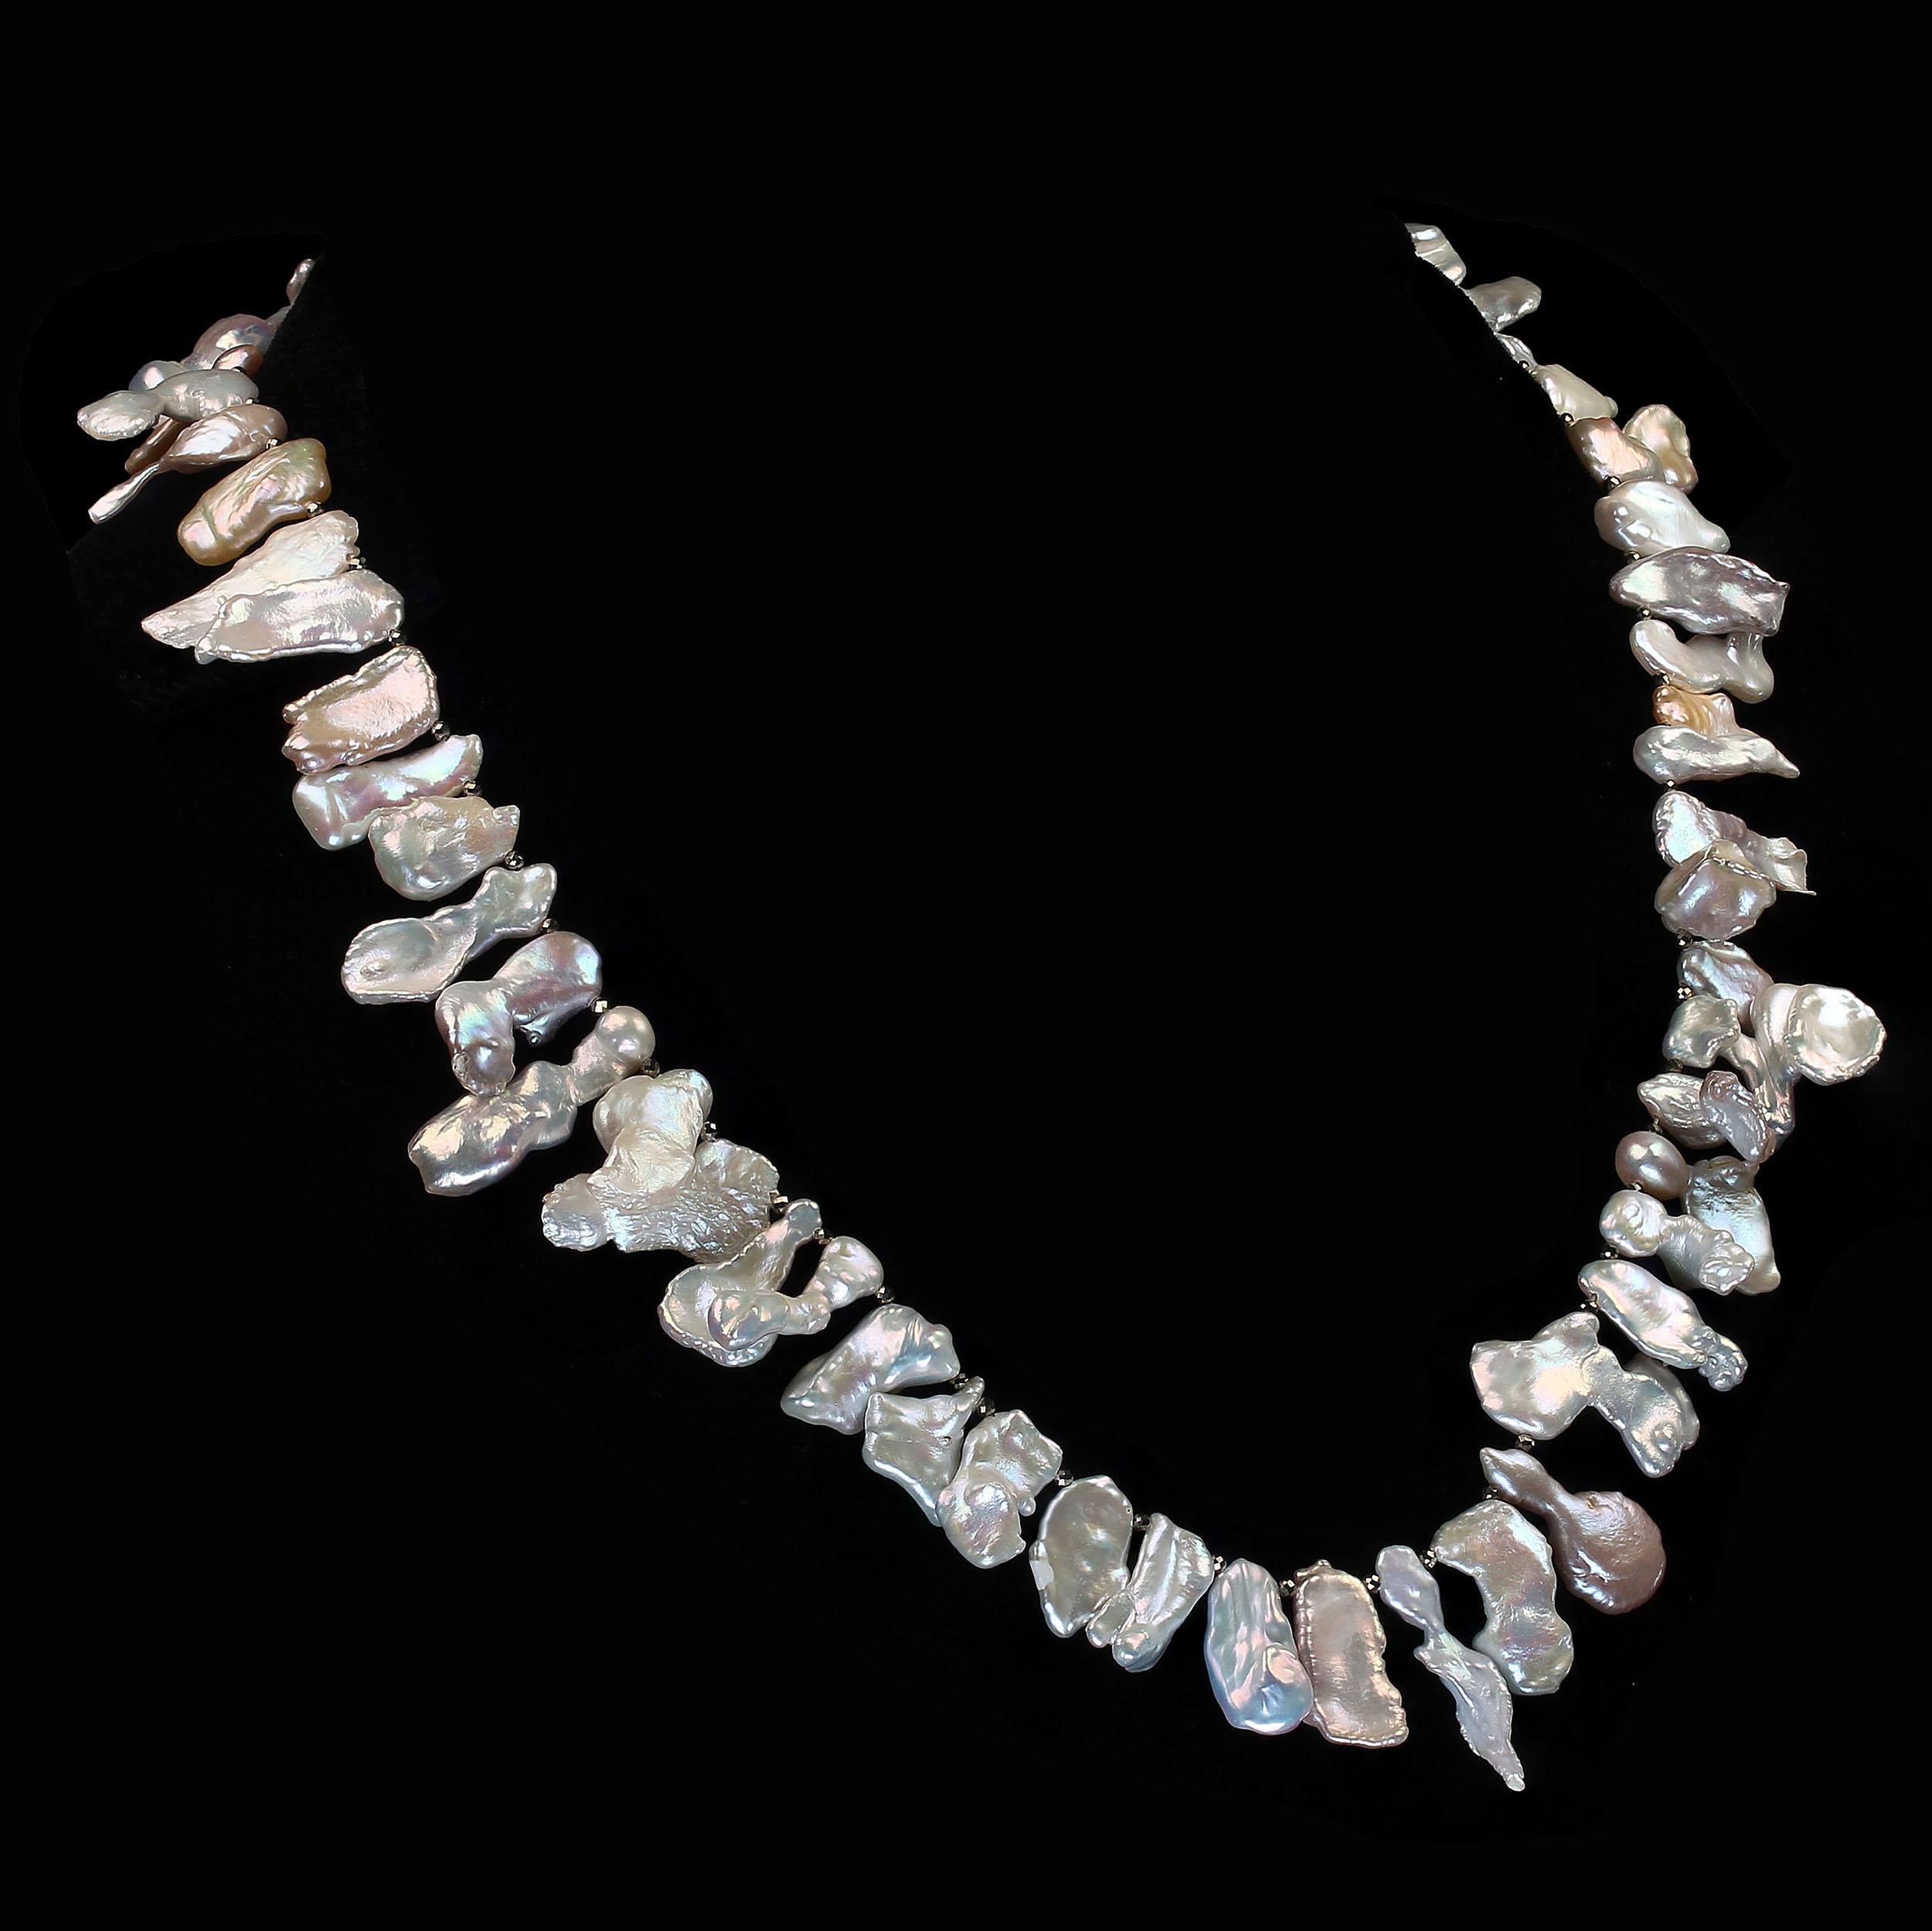 Because you deserve to wear Pearls

Custom made necklace of iridescent whitish Pearls with sparkling golden pyrite accents. These iridescent Pearls are freeform, mainly longer than wide, featuring interesting shapes and measuring approximately